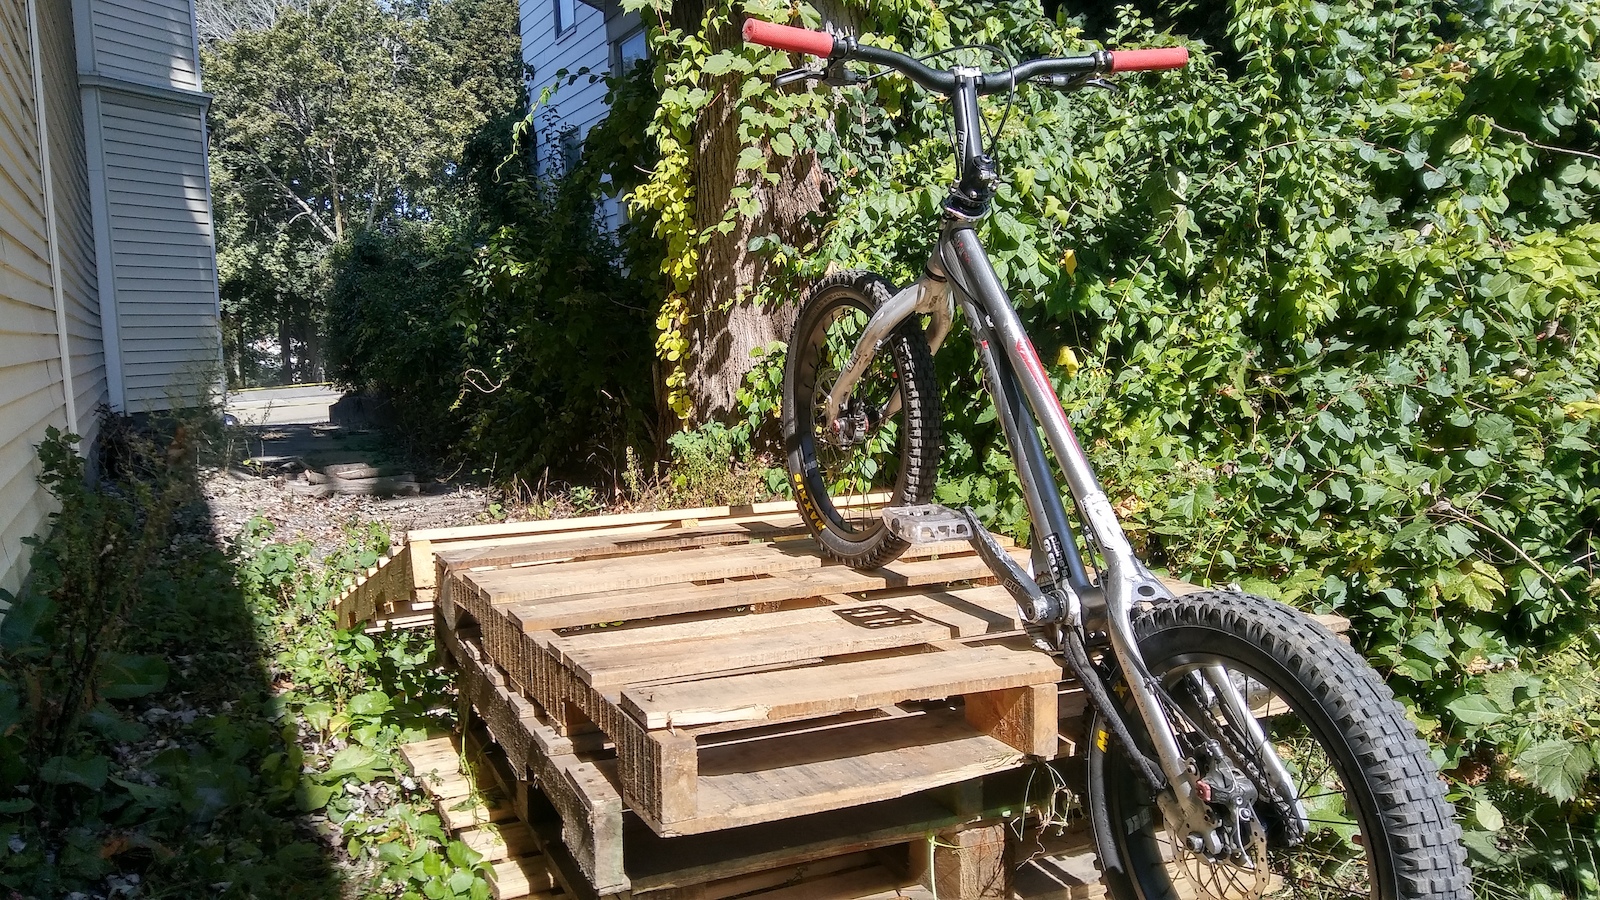 building some obstacles at lunch behind the bike shop...